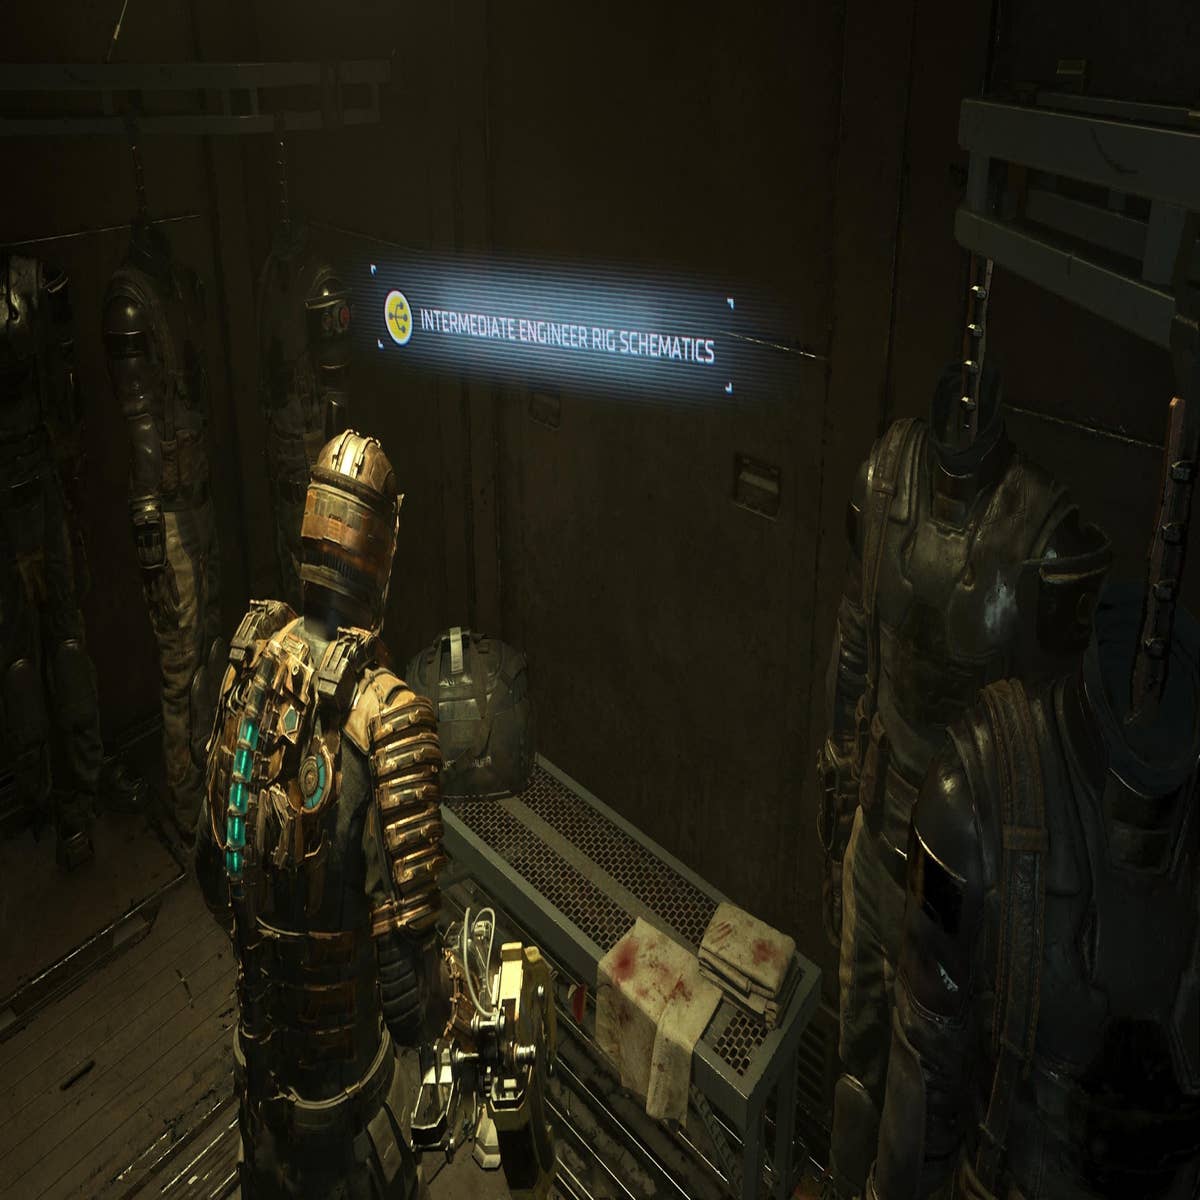 Dead Space suit upgrade locations, including how to get the final